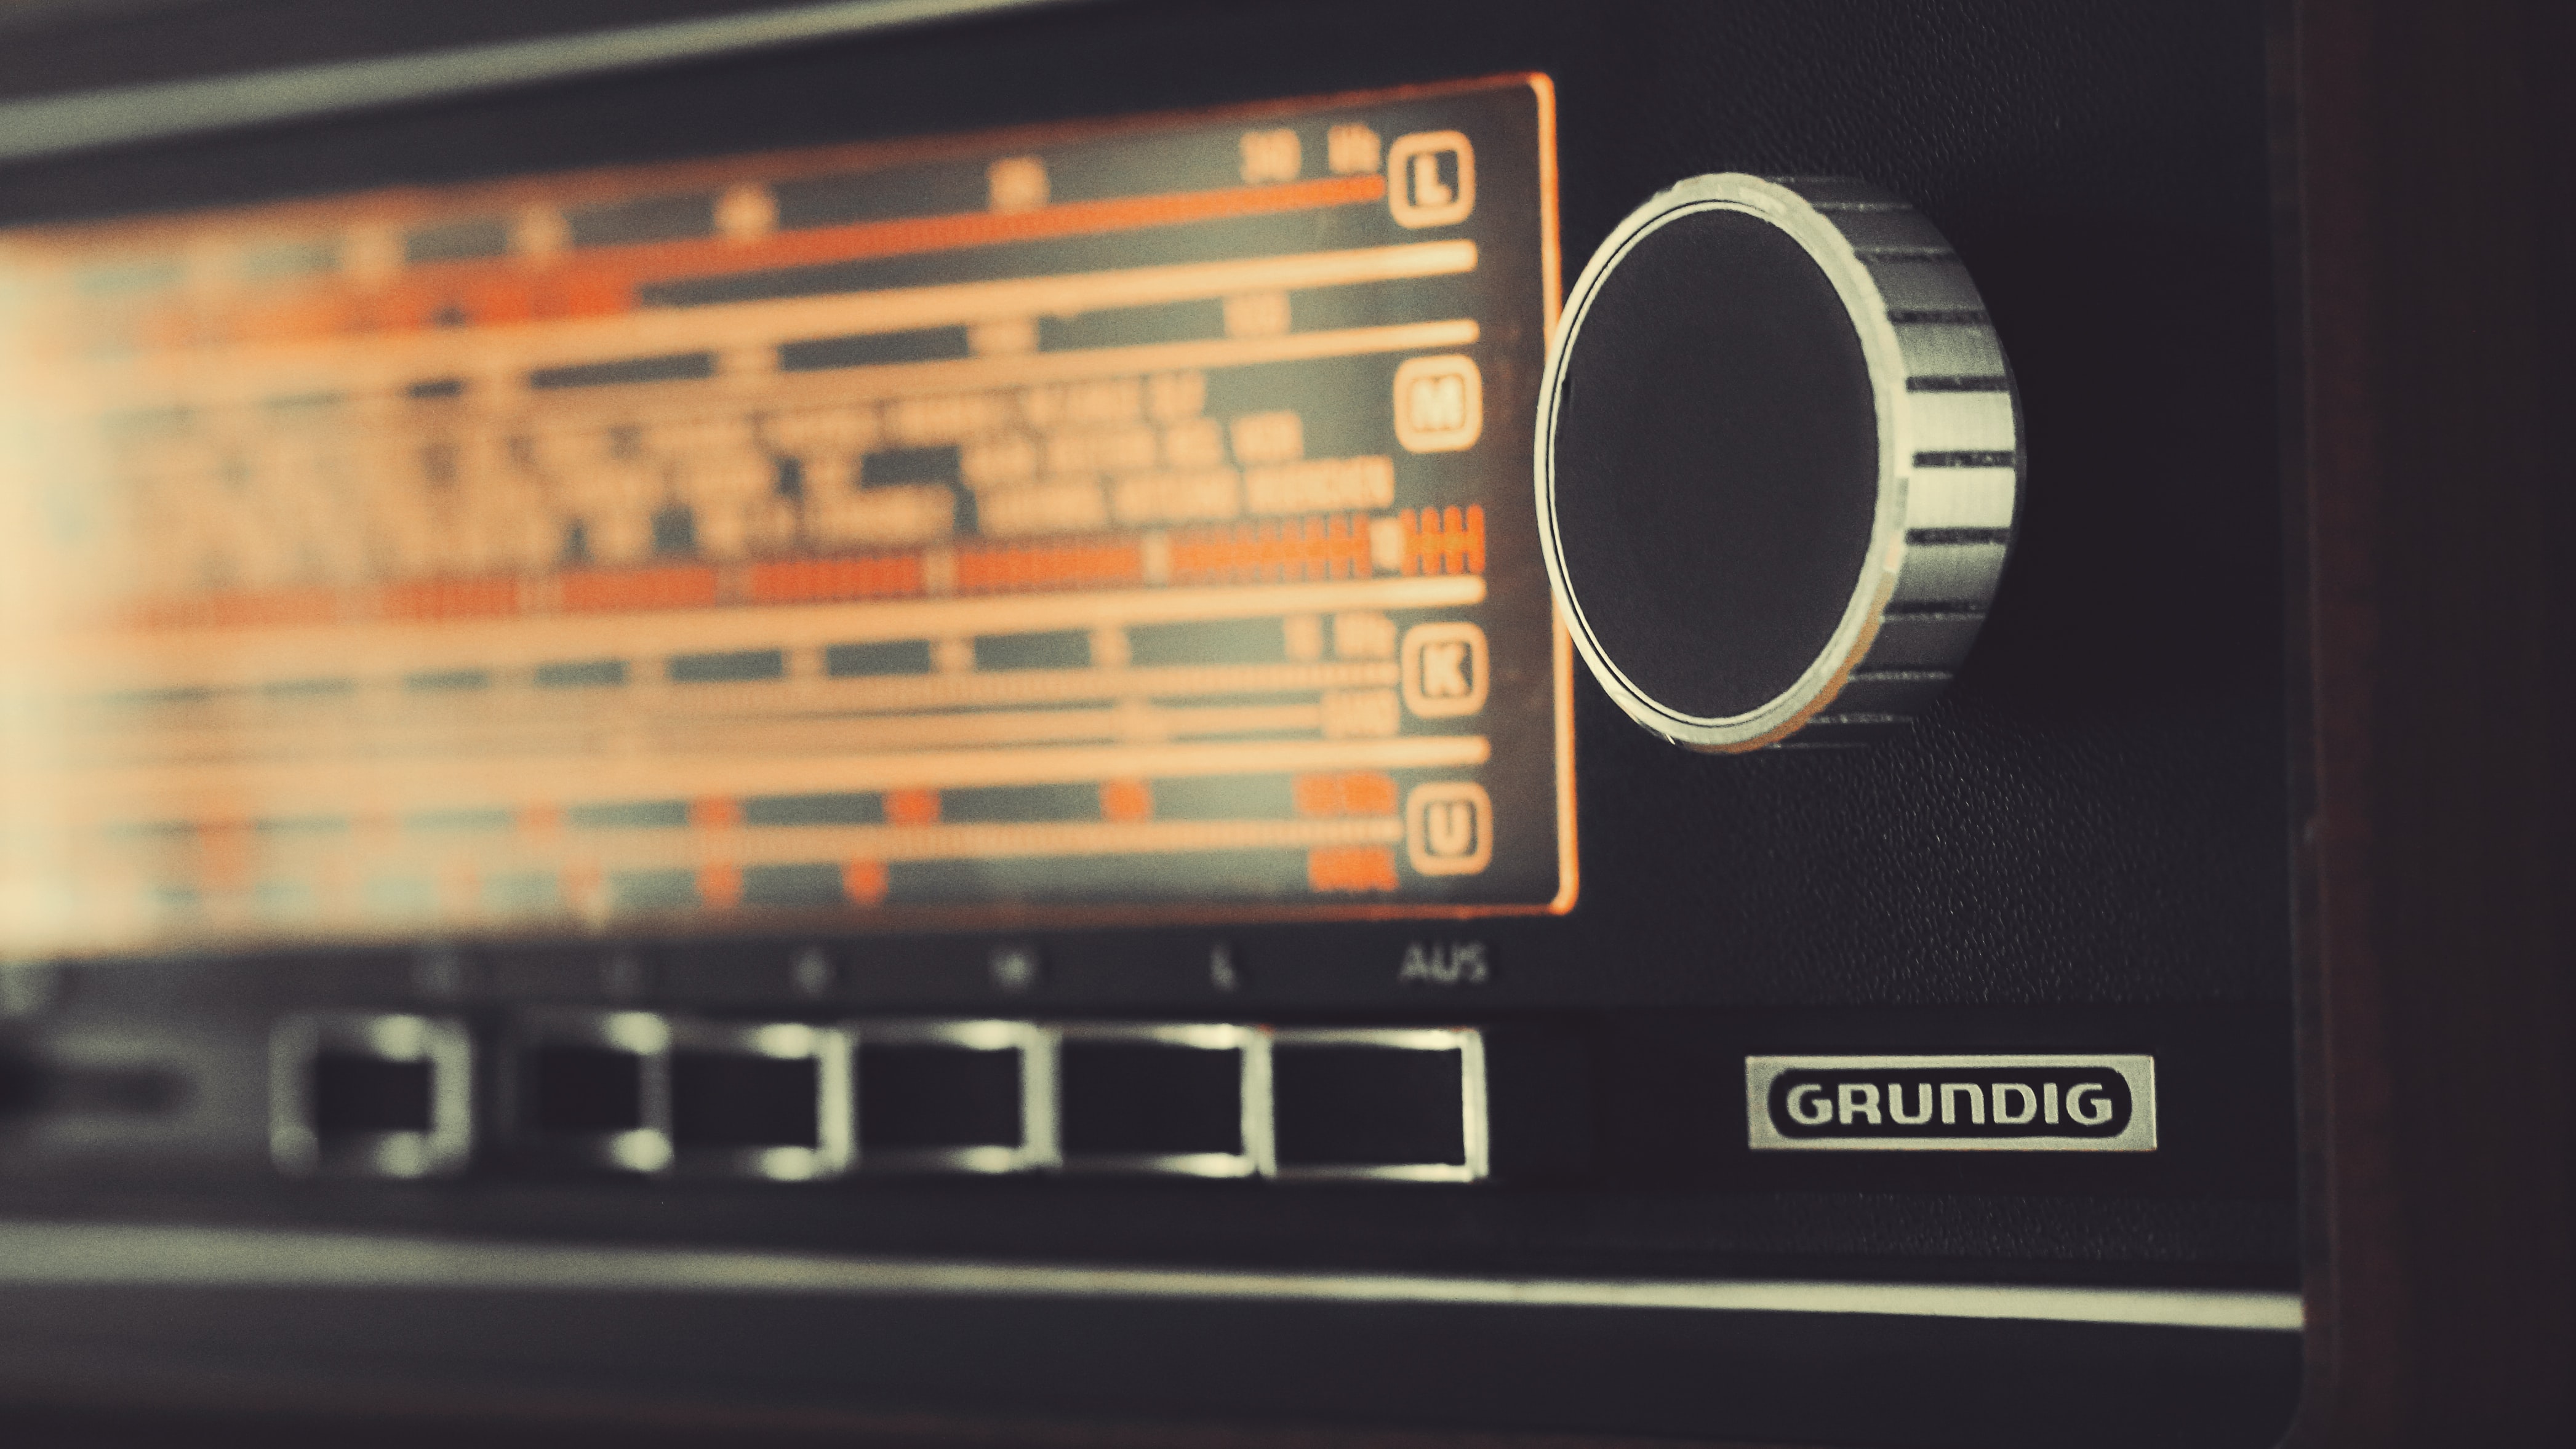 Fantastic Frequency: The hero that can save your radio campaign.